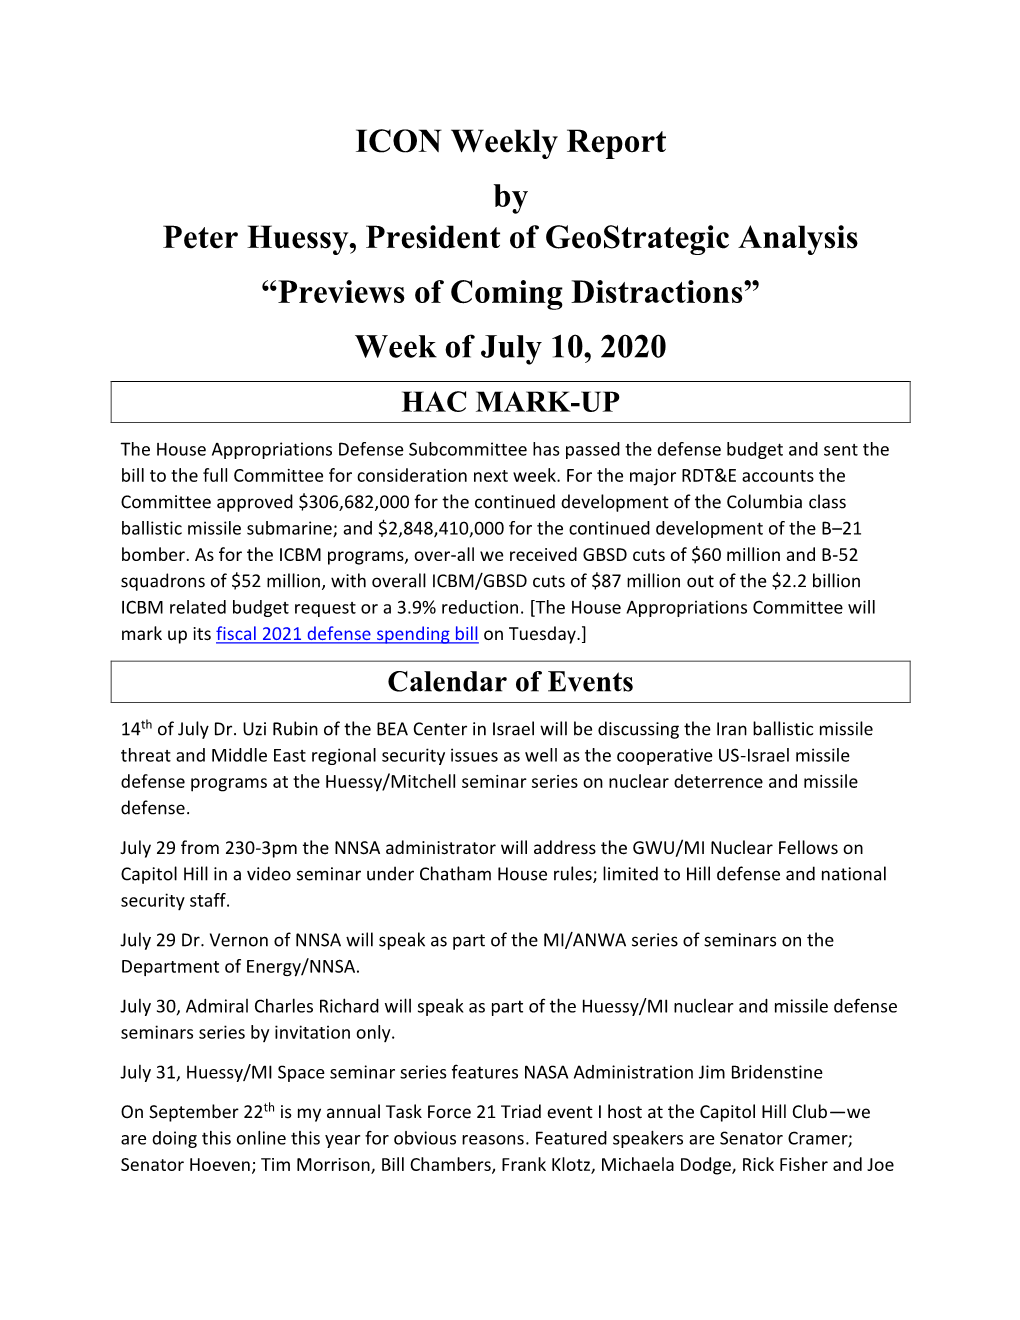 ICON Weekly Report by Peter Huessy, President of Geostrategic Analysis “Previews of Coming Distractions” Week of July 10, 2020 HAC MARK-UP